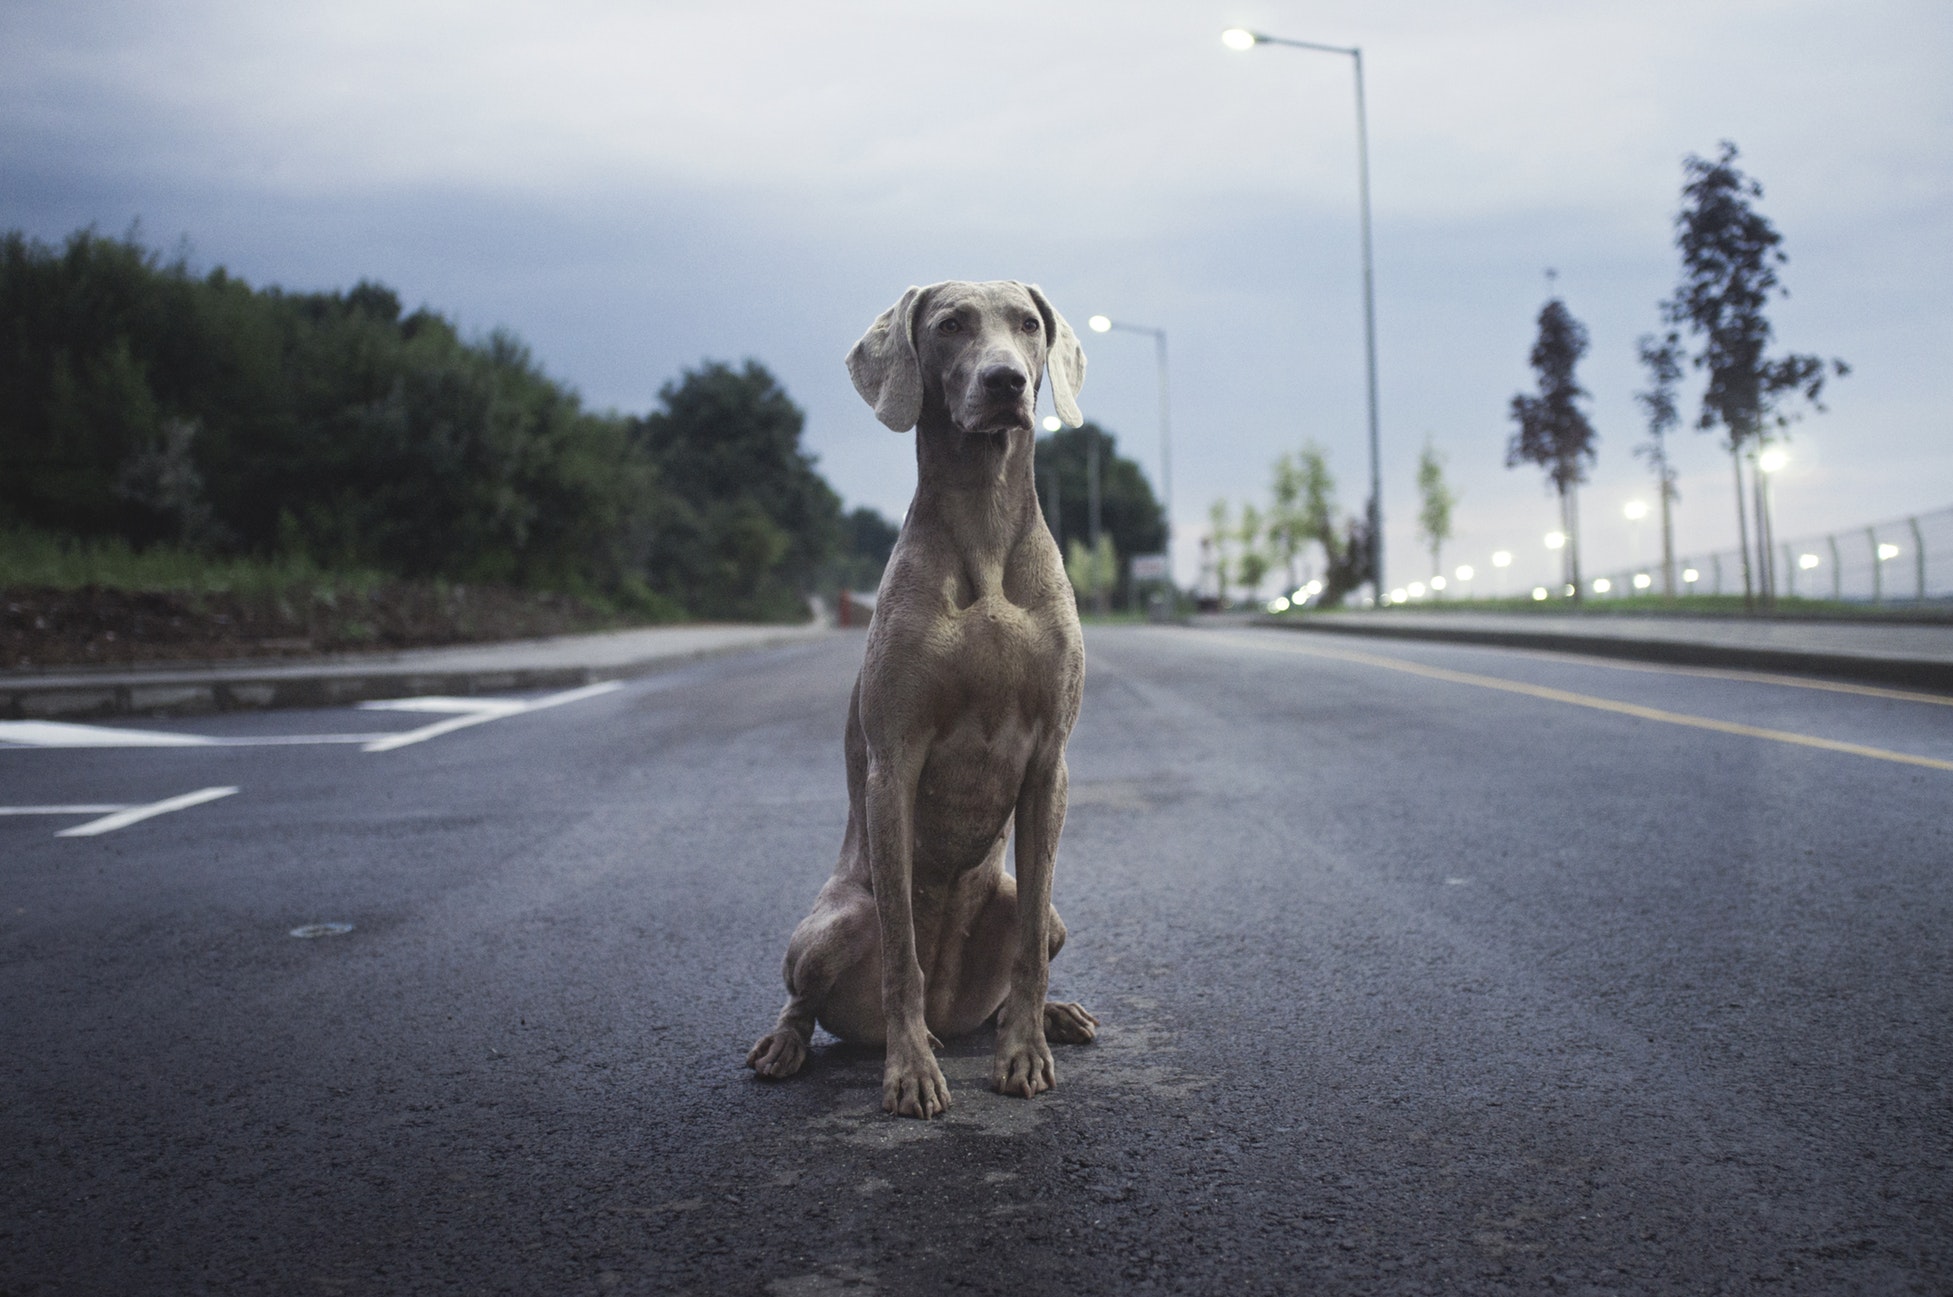 Gray dog sitting in the middle of a road.